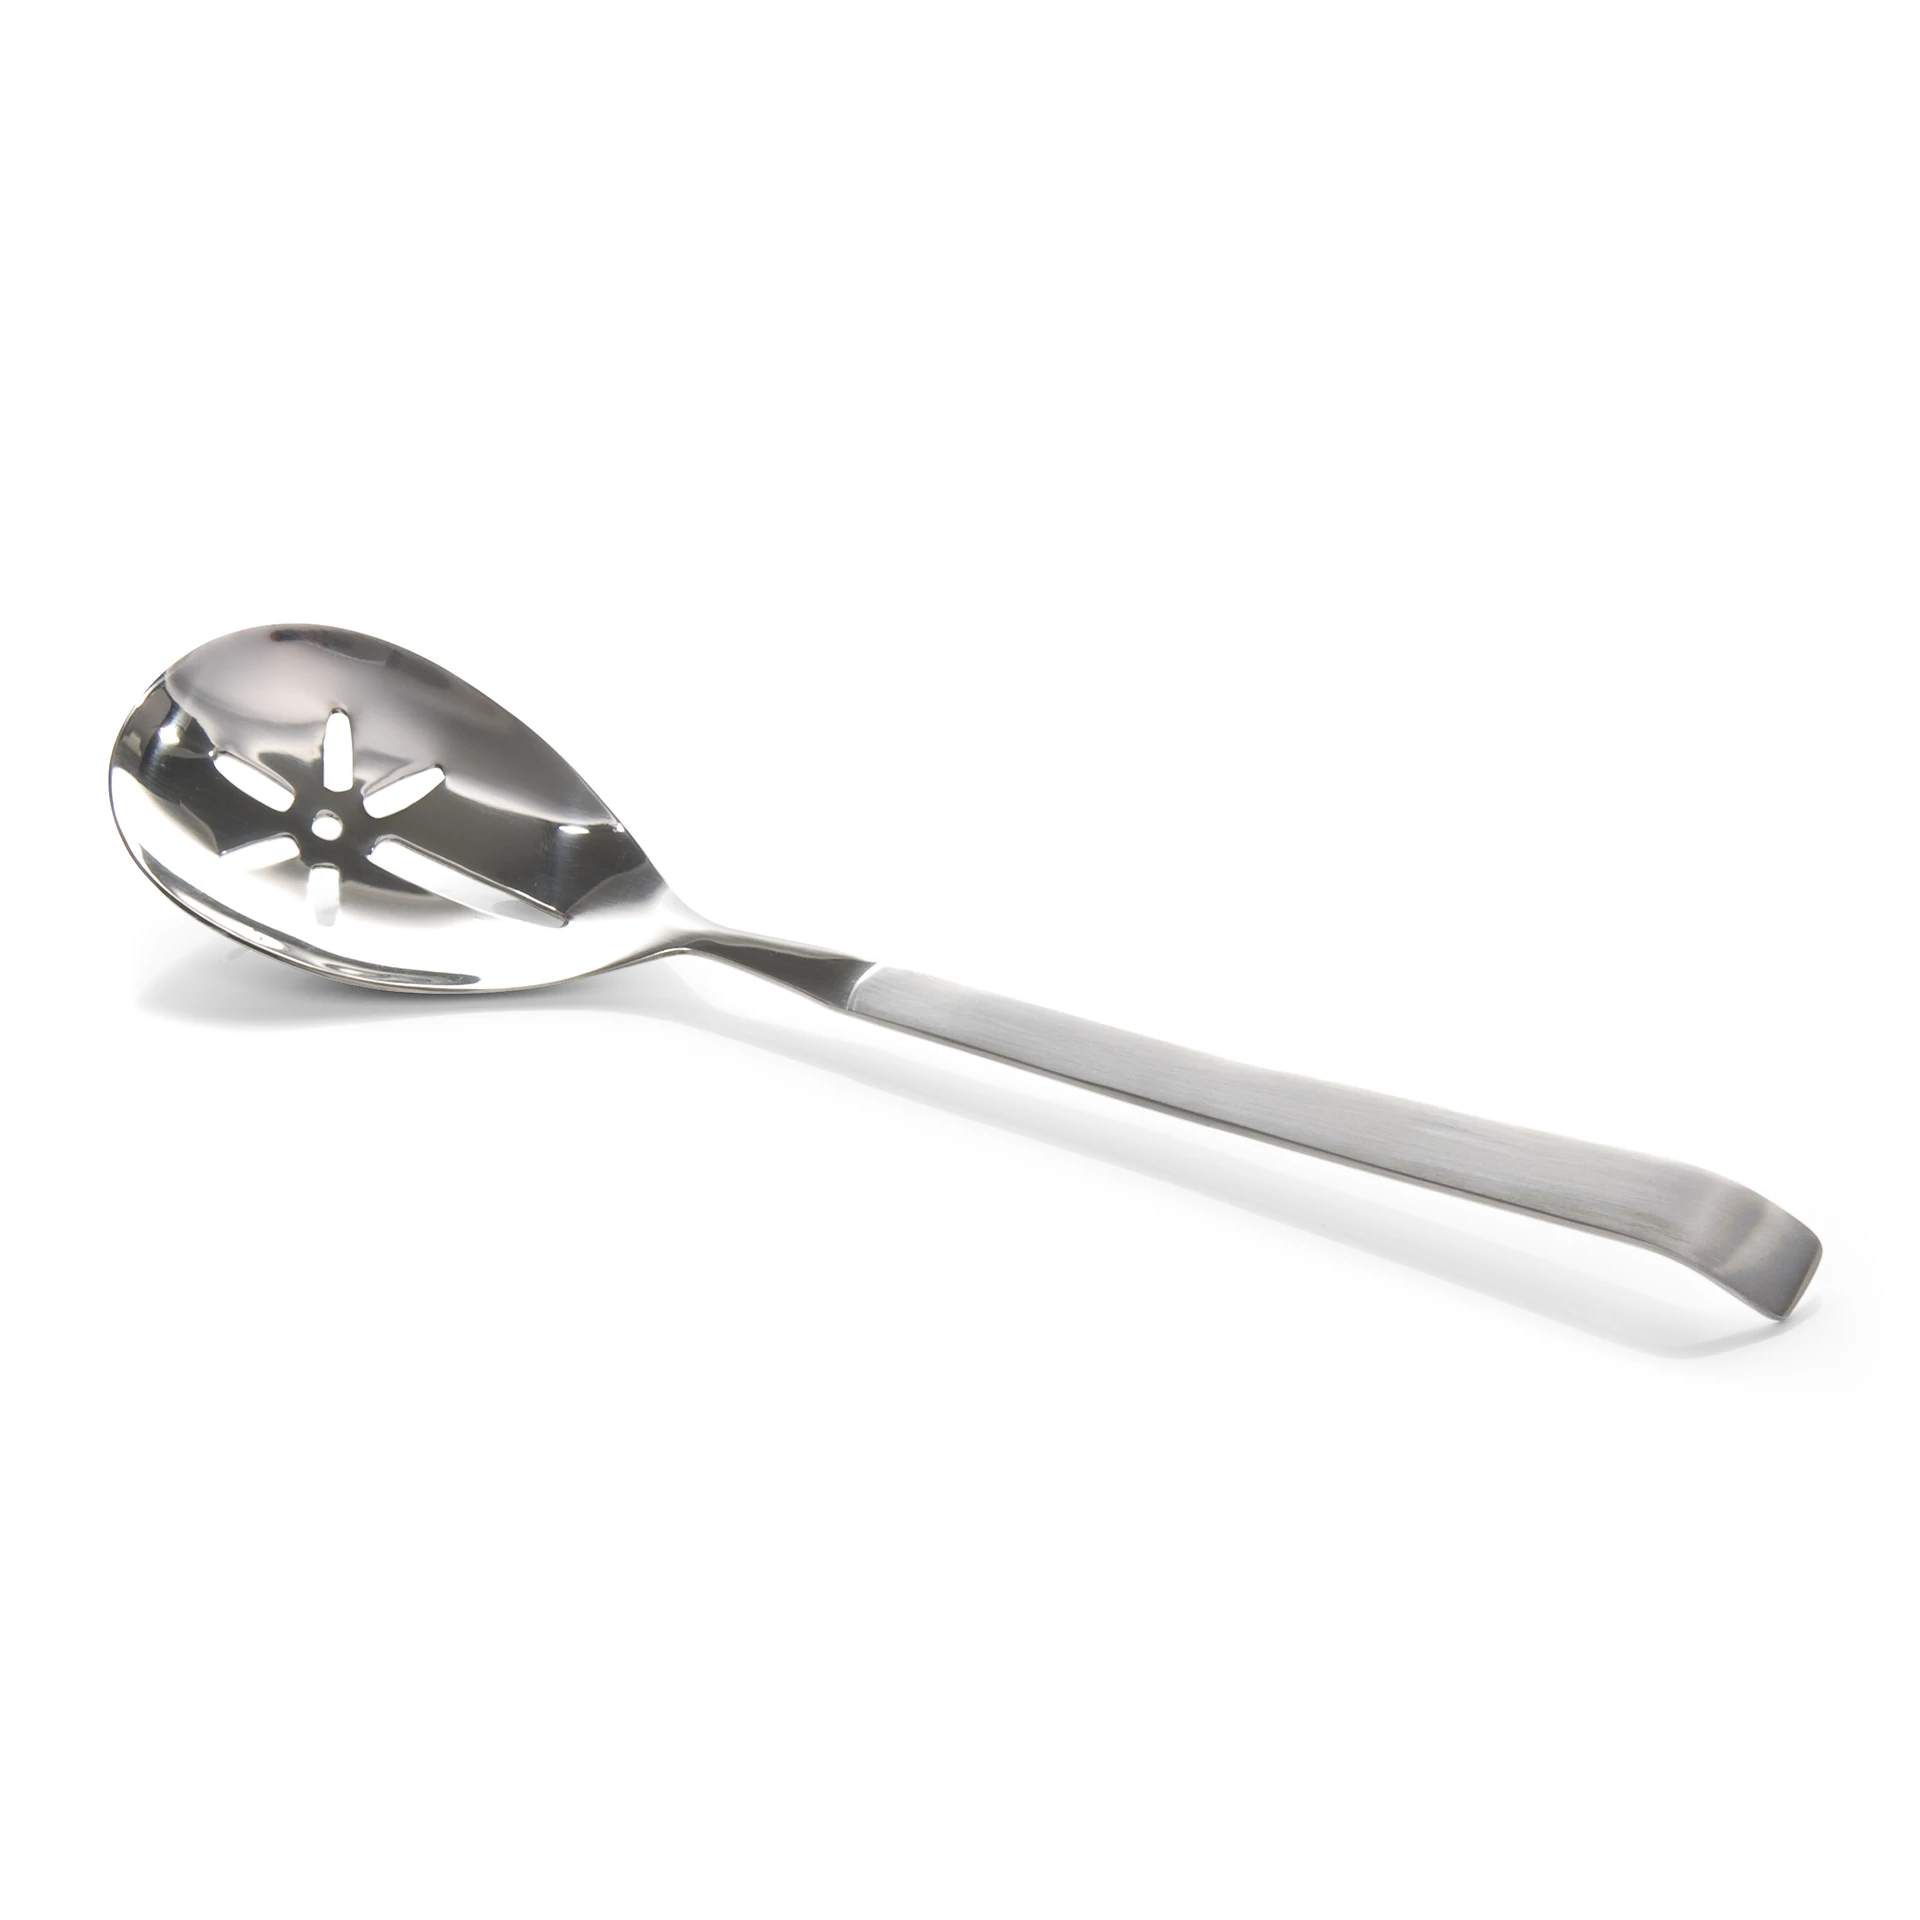 Chafing dish spoon Kitchen Tool 2160